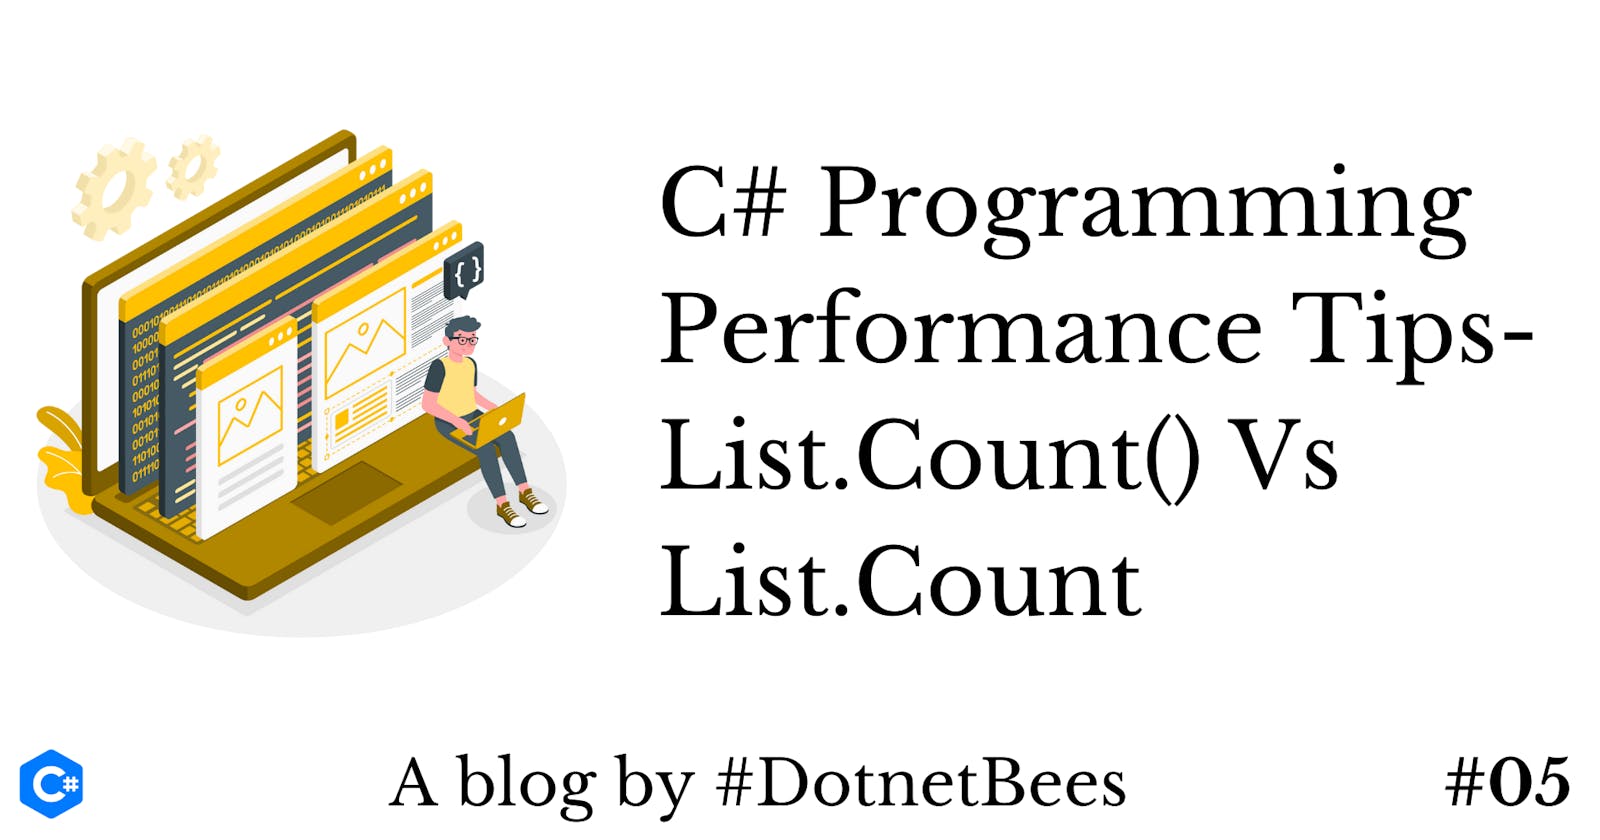 C# Programming Performance Tips - List.Count() Vs List.Count